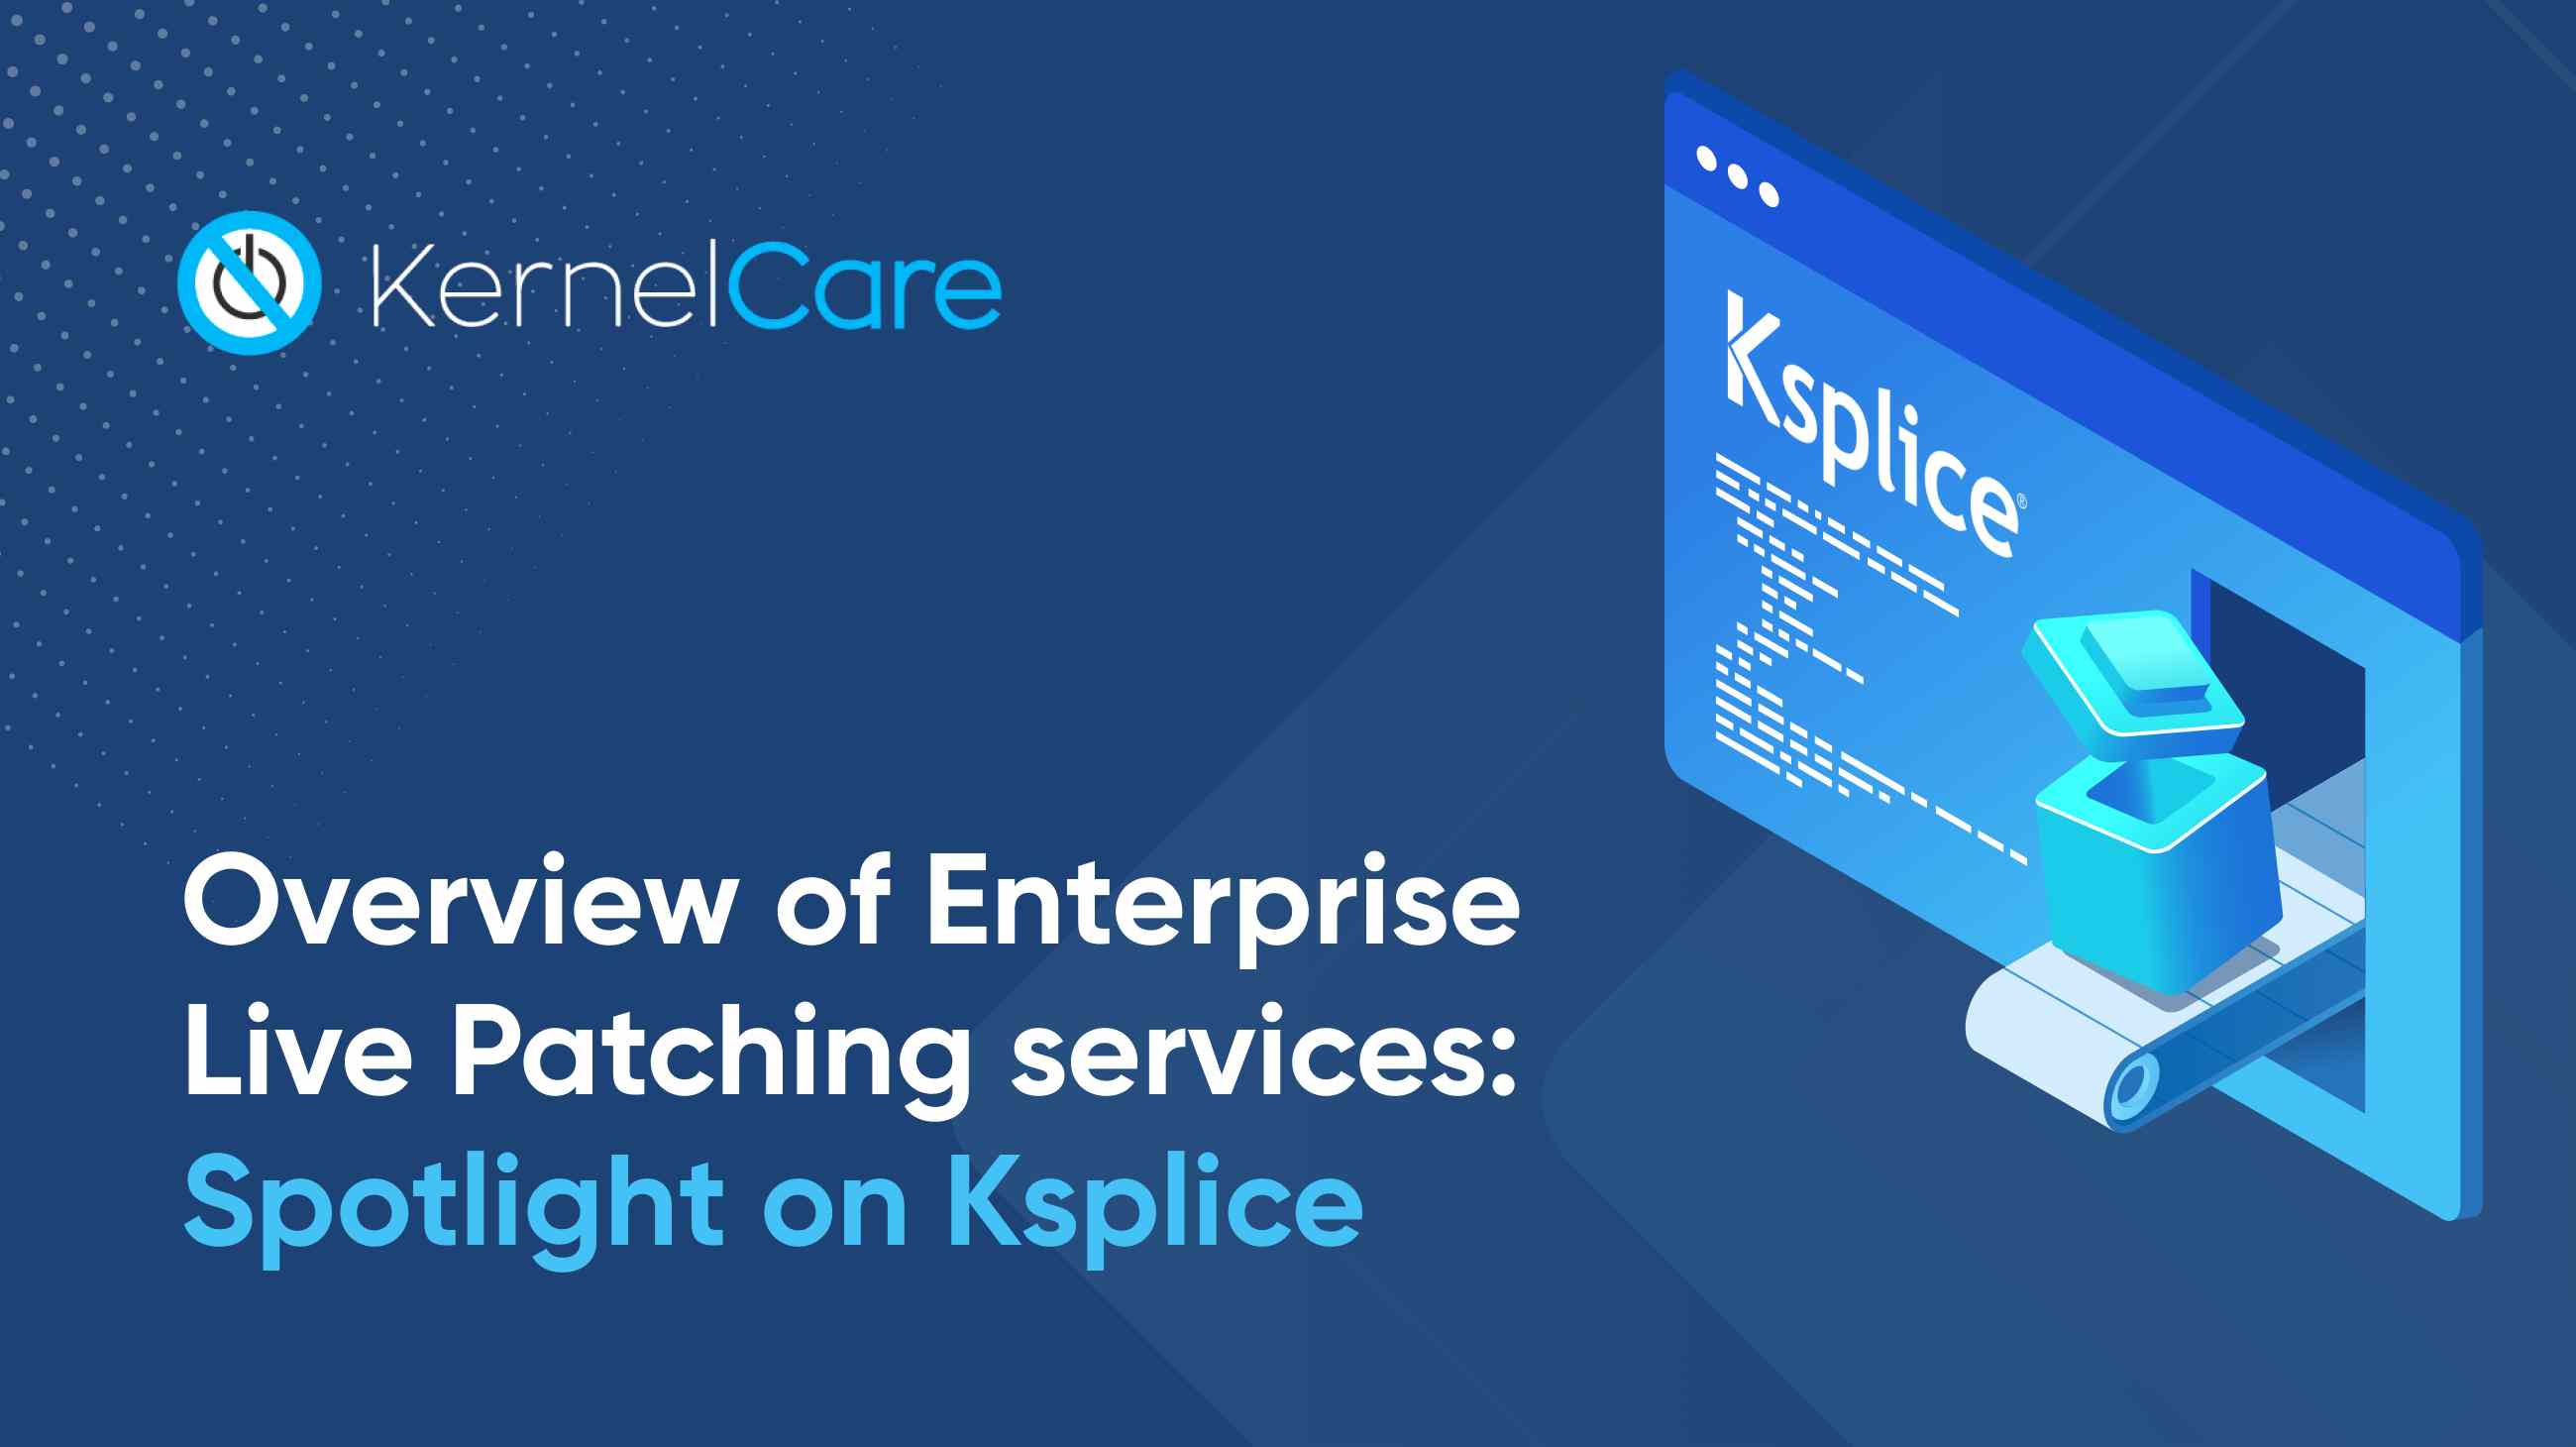 Overview of Enterprise Live Patching services: Spotlight on Ksplice